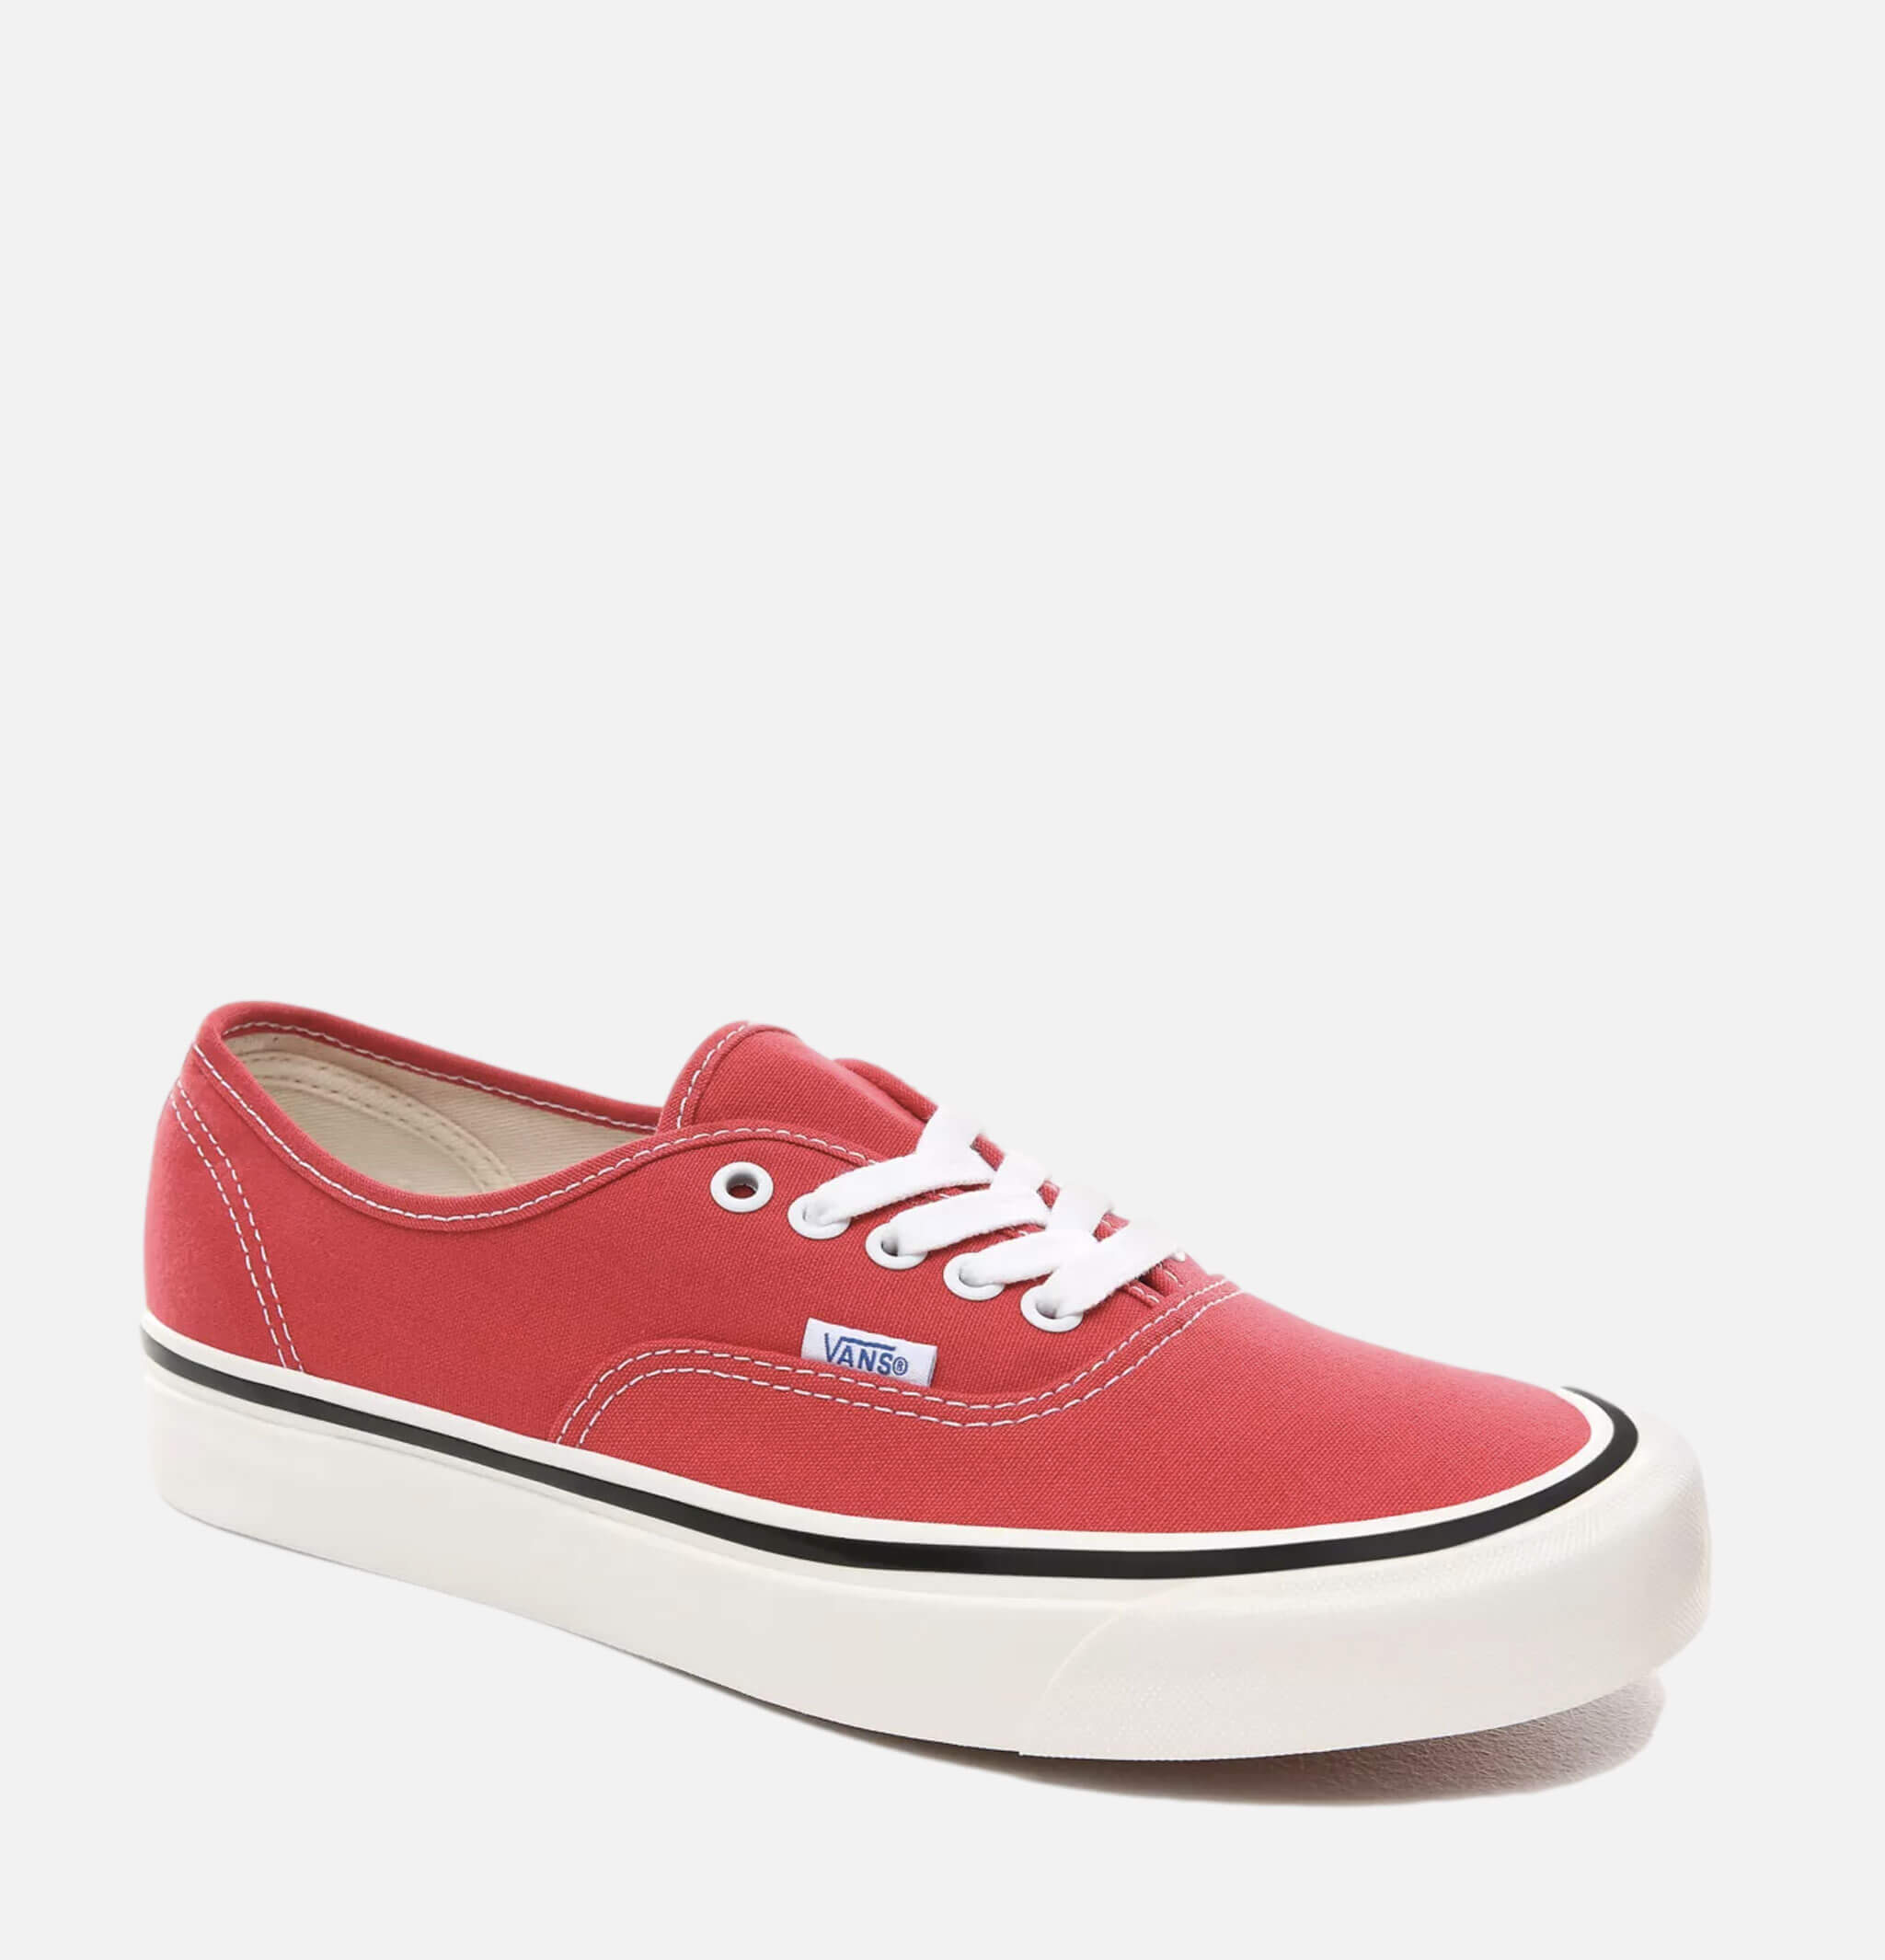 Authentic Anaheim Red